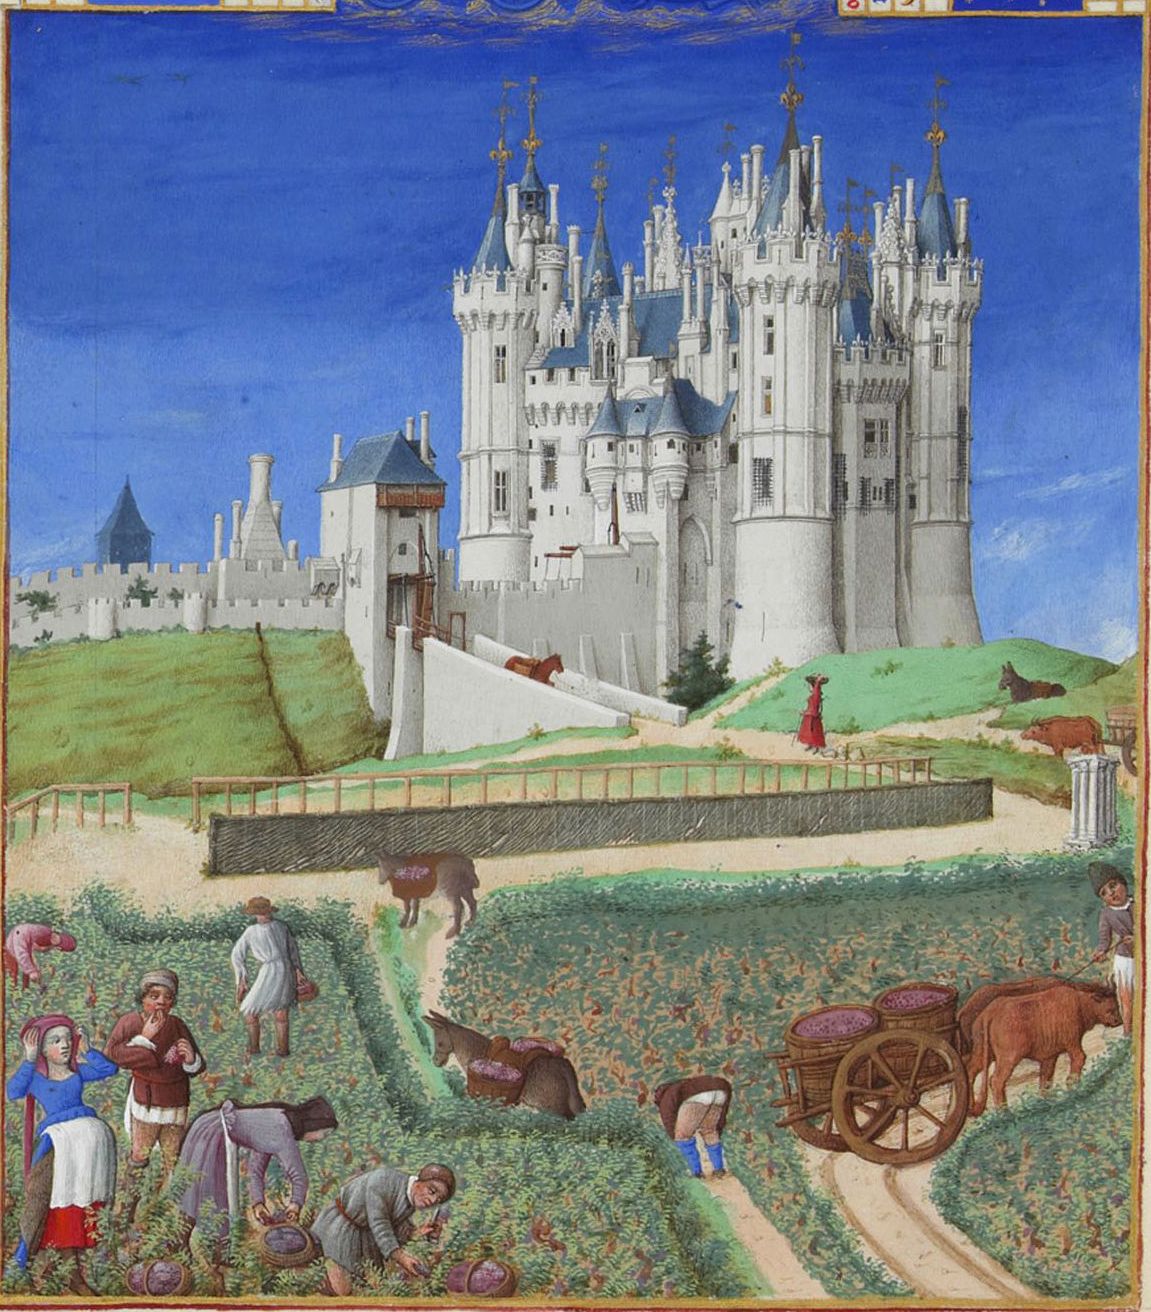 Très Riches Heures du Duc de Berry - September by the Limbourg brothers, 1416.